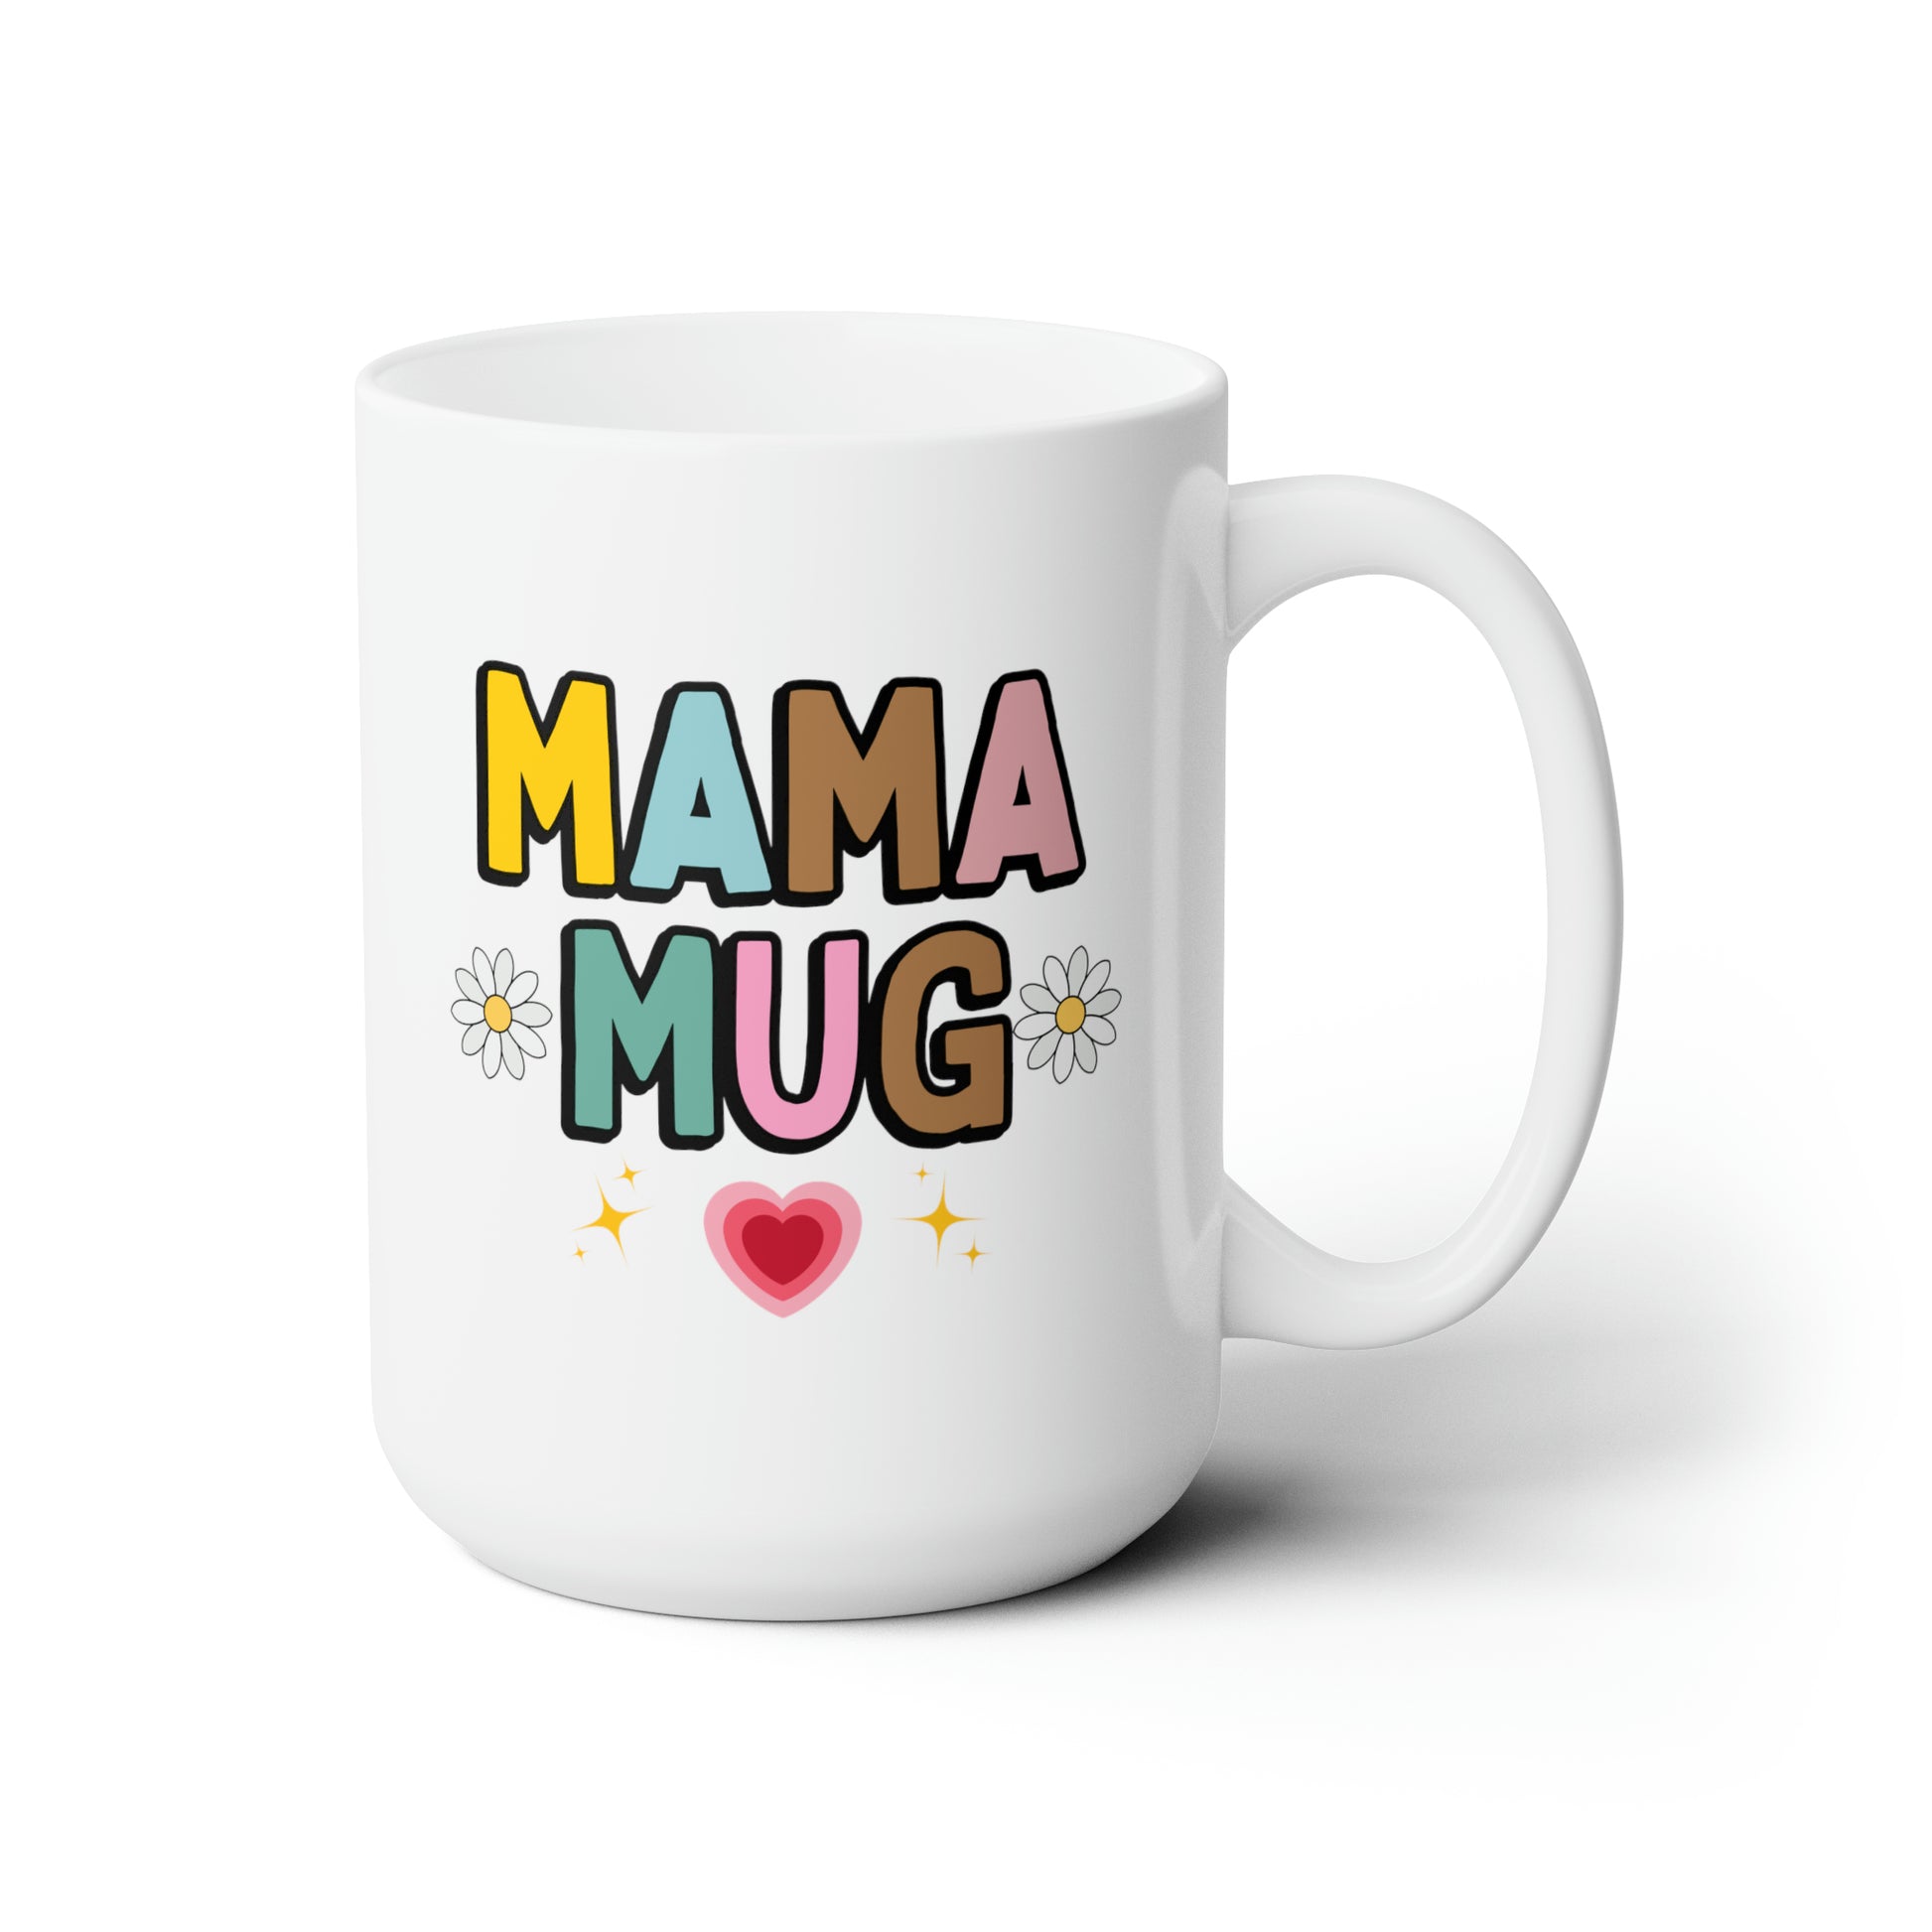 Mama Mug 15oz white funny large coffee mug gift for new mom mother pregnancy announcement baby shower waveywares wavey wares wavywares wavy wares